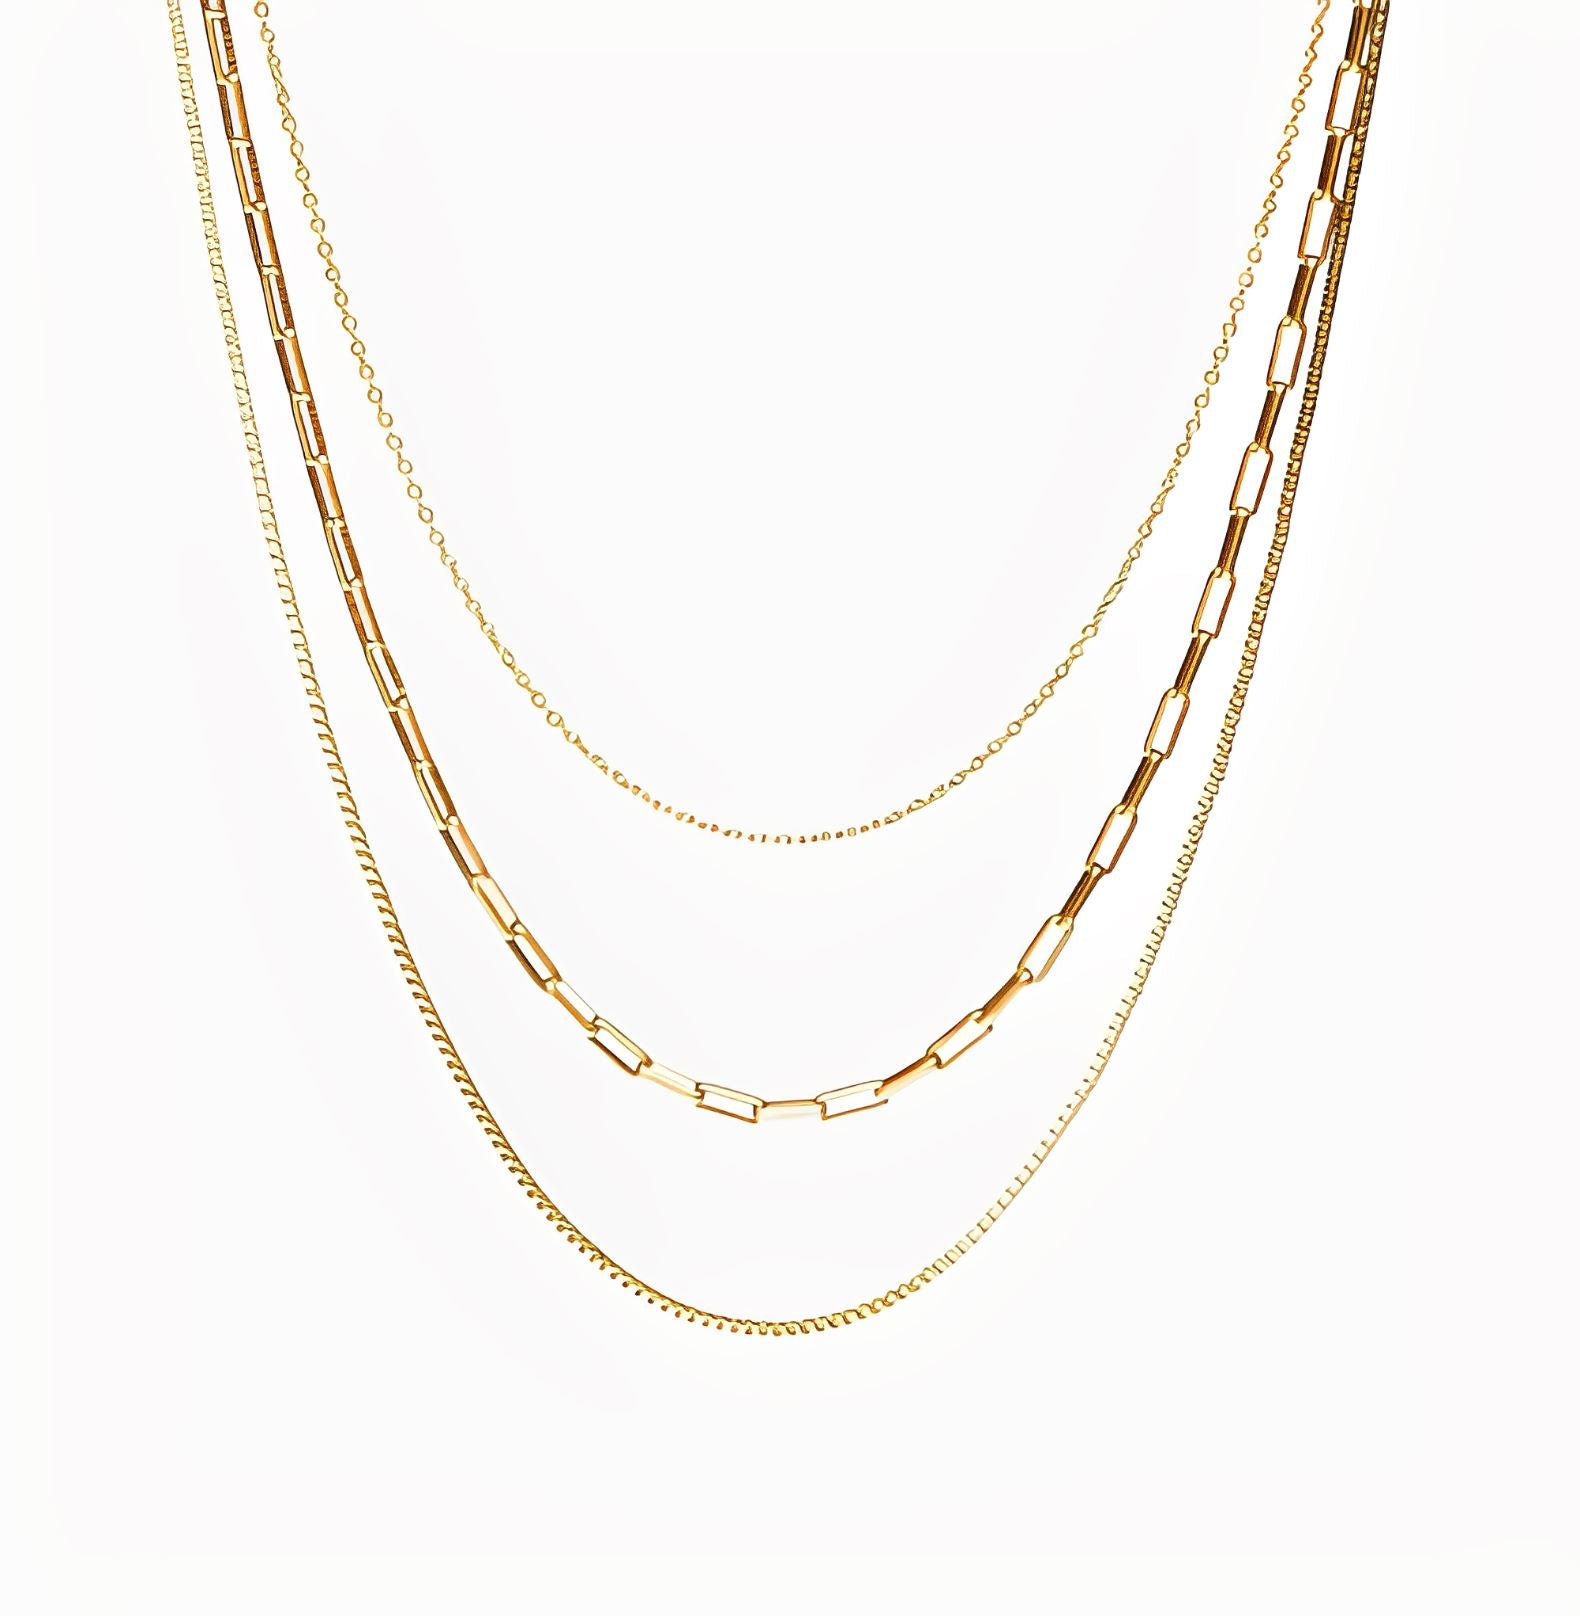 " 3" LAYERED NECKLACE braclet Yubama Jewelry Online Store - The Elegant Designs of Gold and Silver ! 